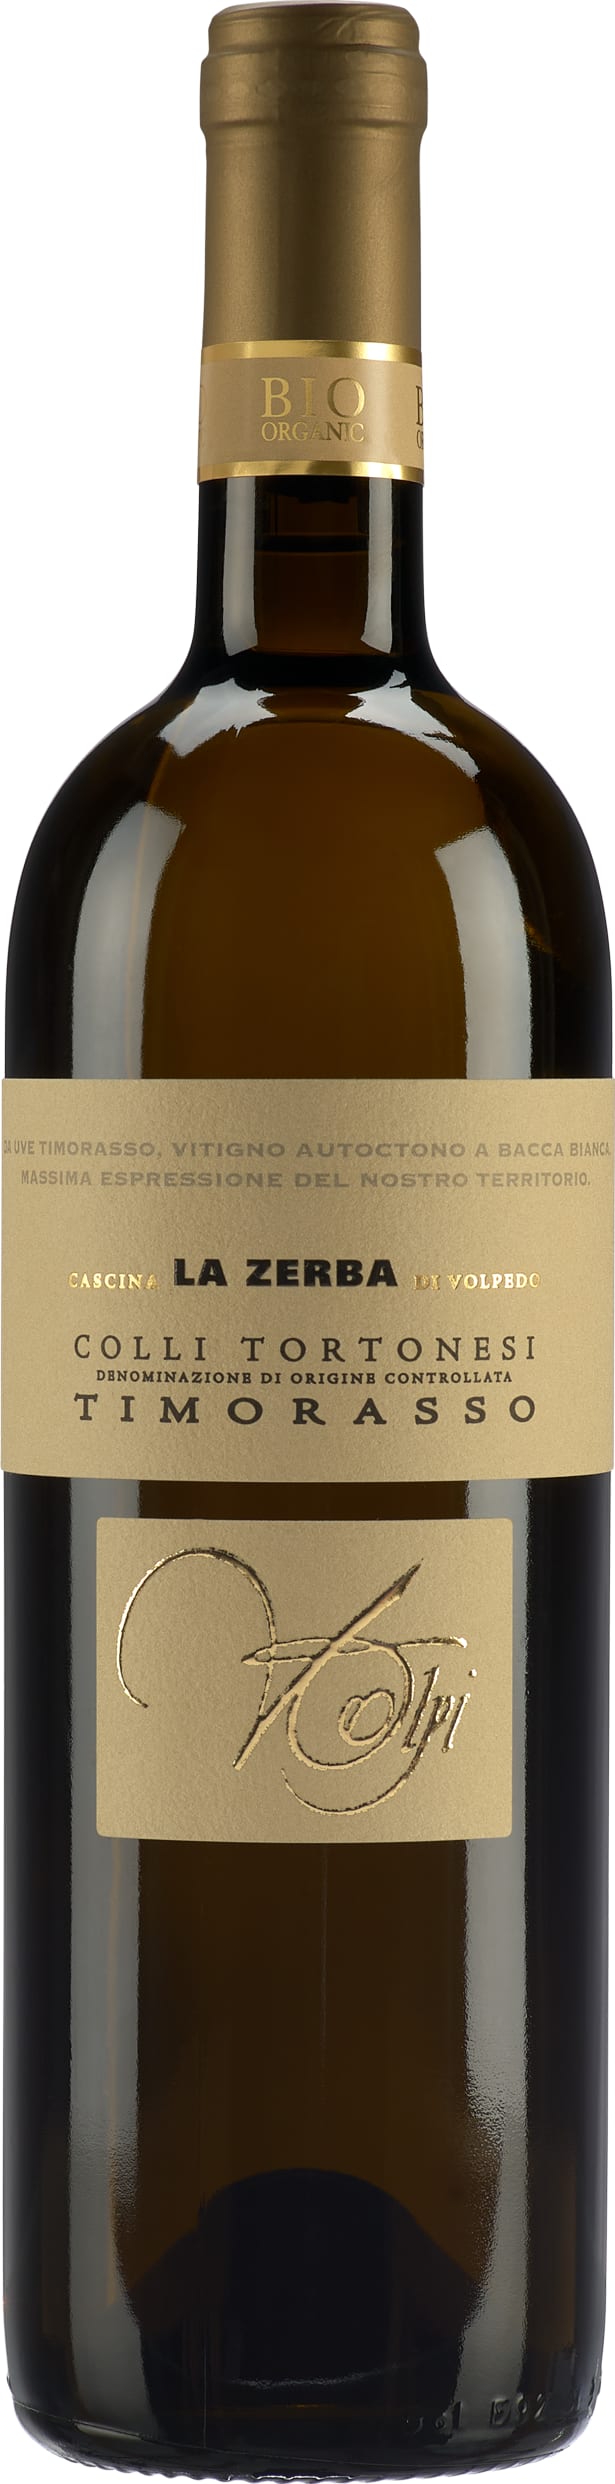 Volpi Timorasso 'La Zerba' 2022 75cl - Buy Volpi Wines from GREAT WINES DIRECT wine shop